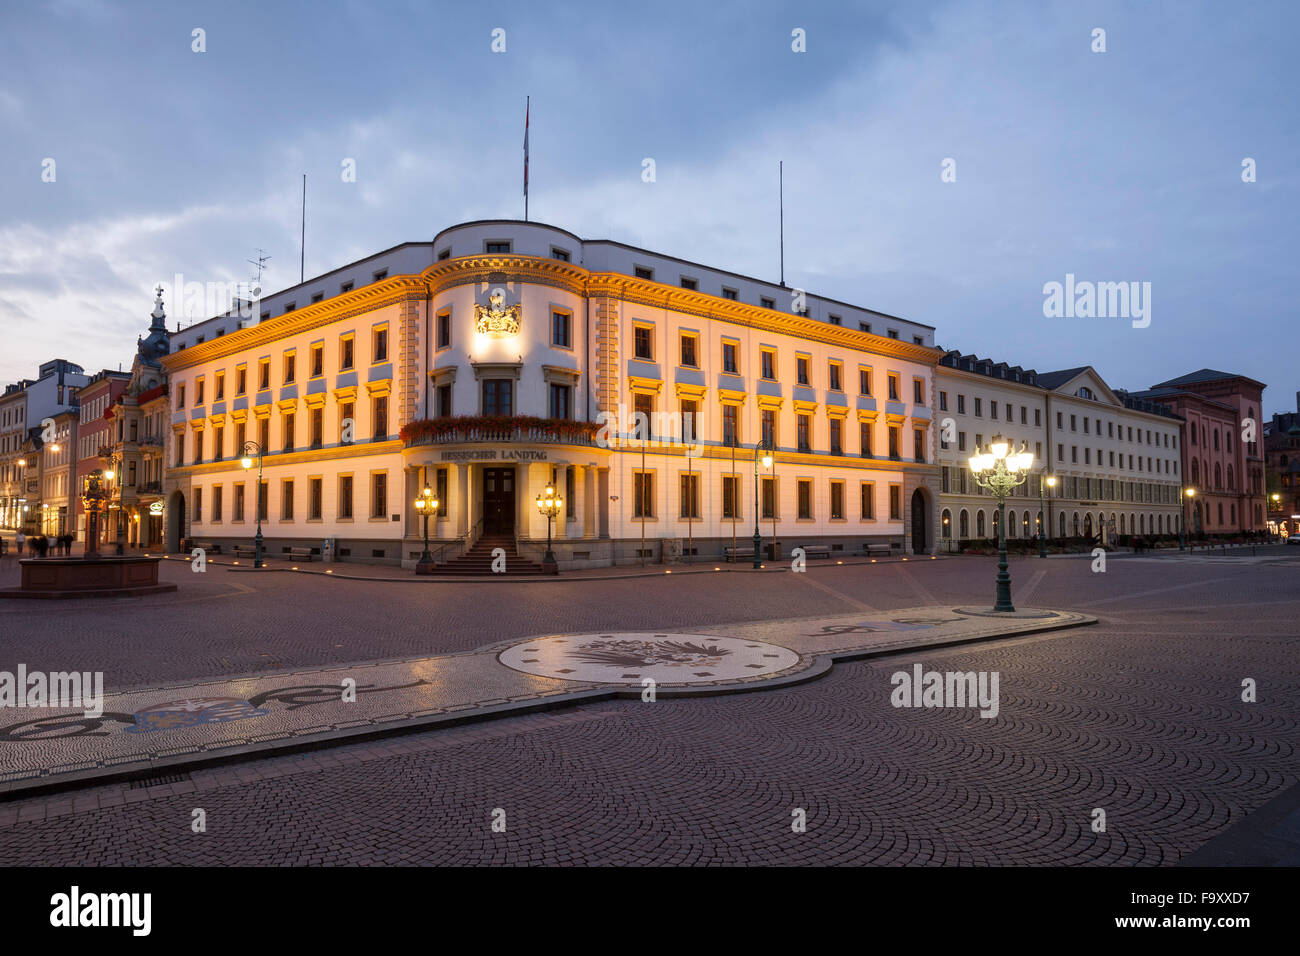 Germany, Hesse, Wiesbaden, Landtag of Hesse, former city palace, in the evening Stock Photo